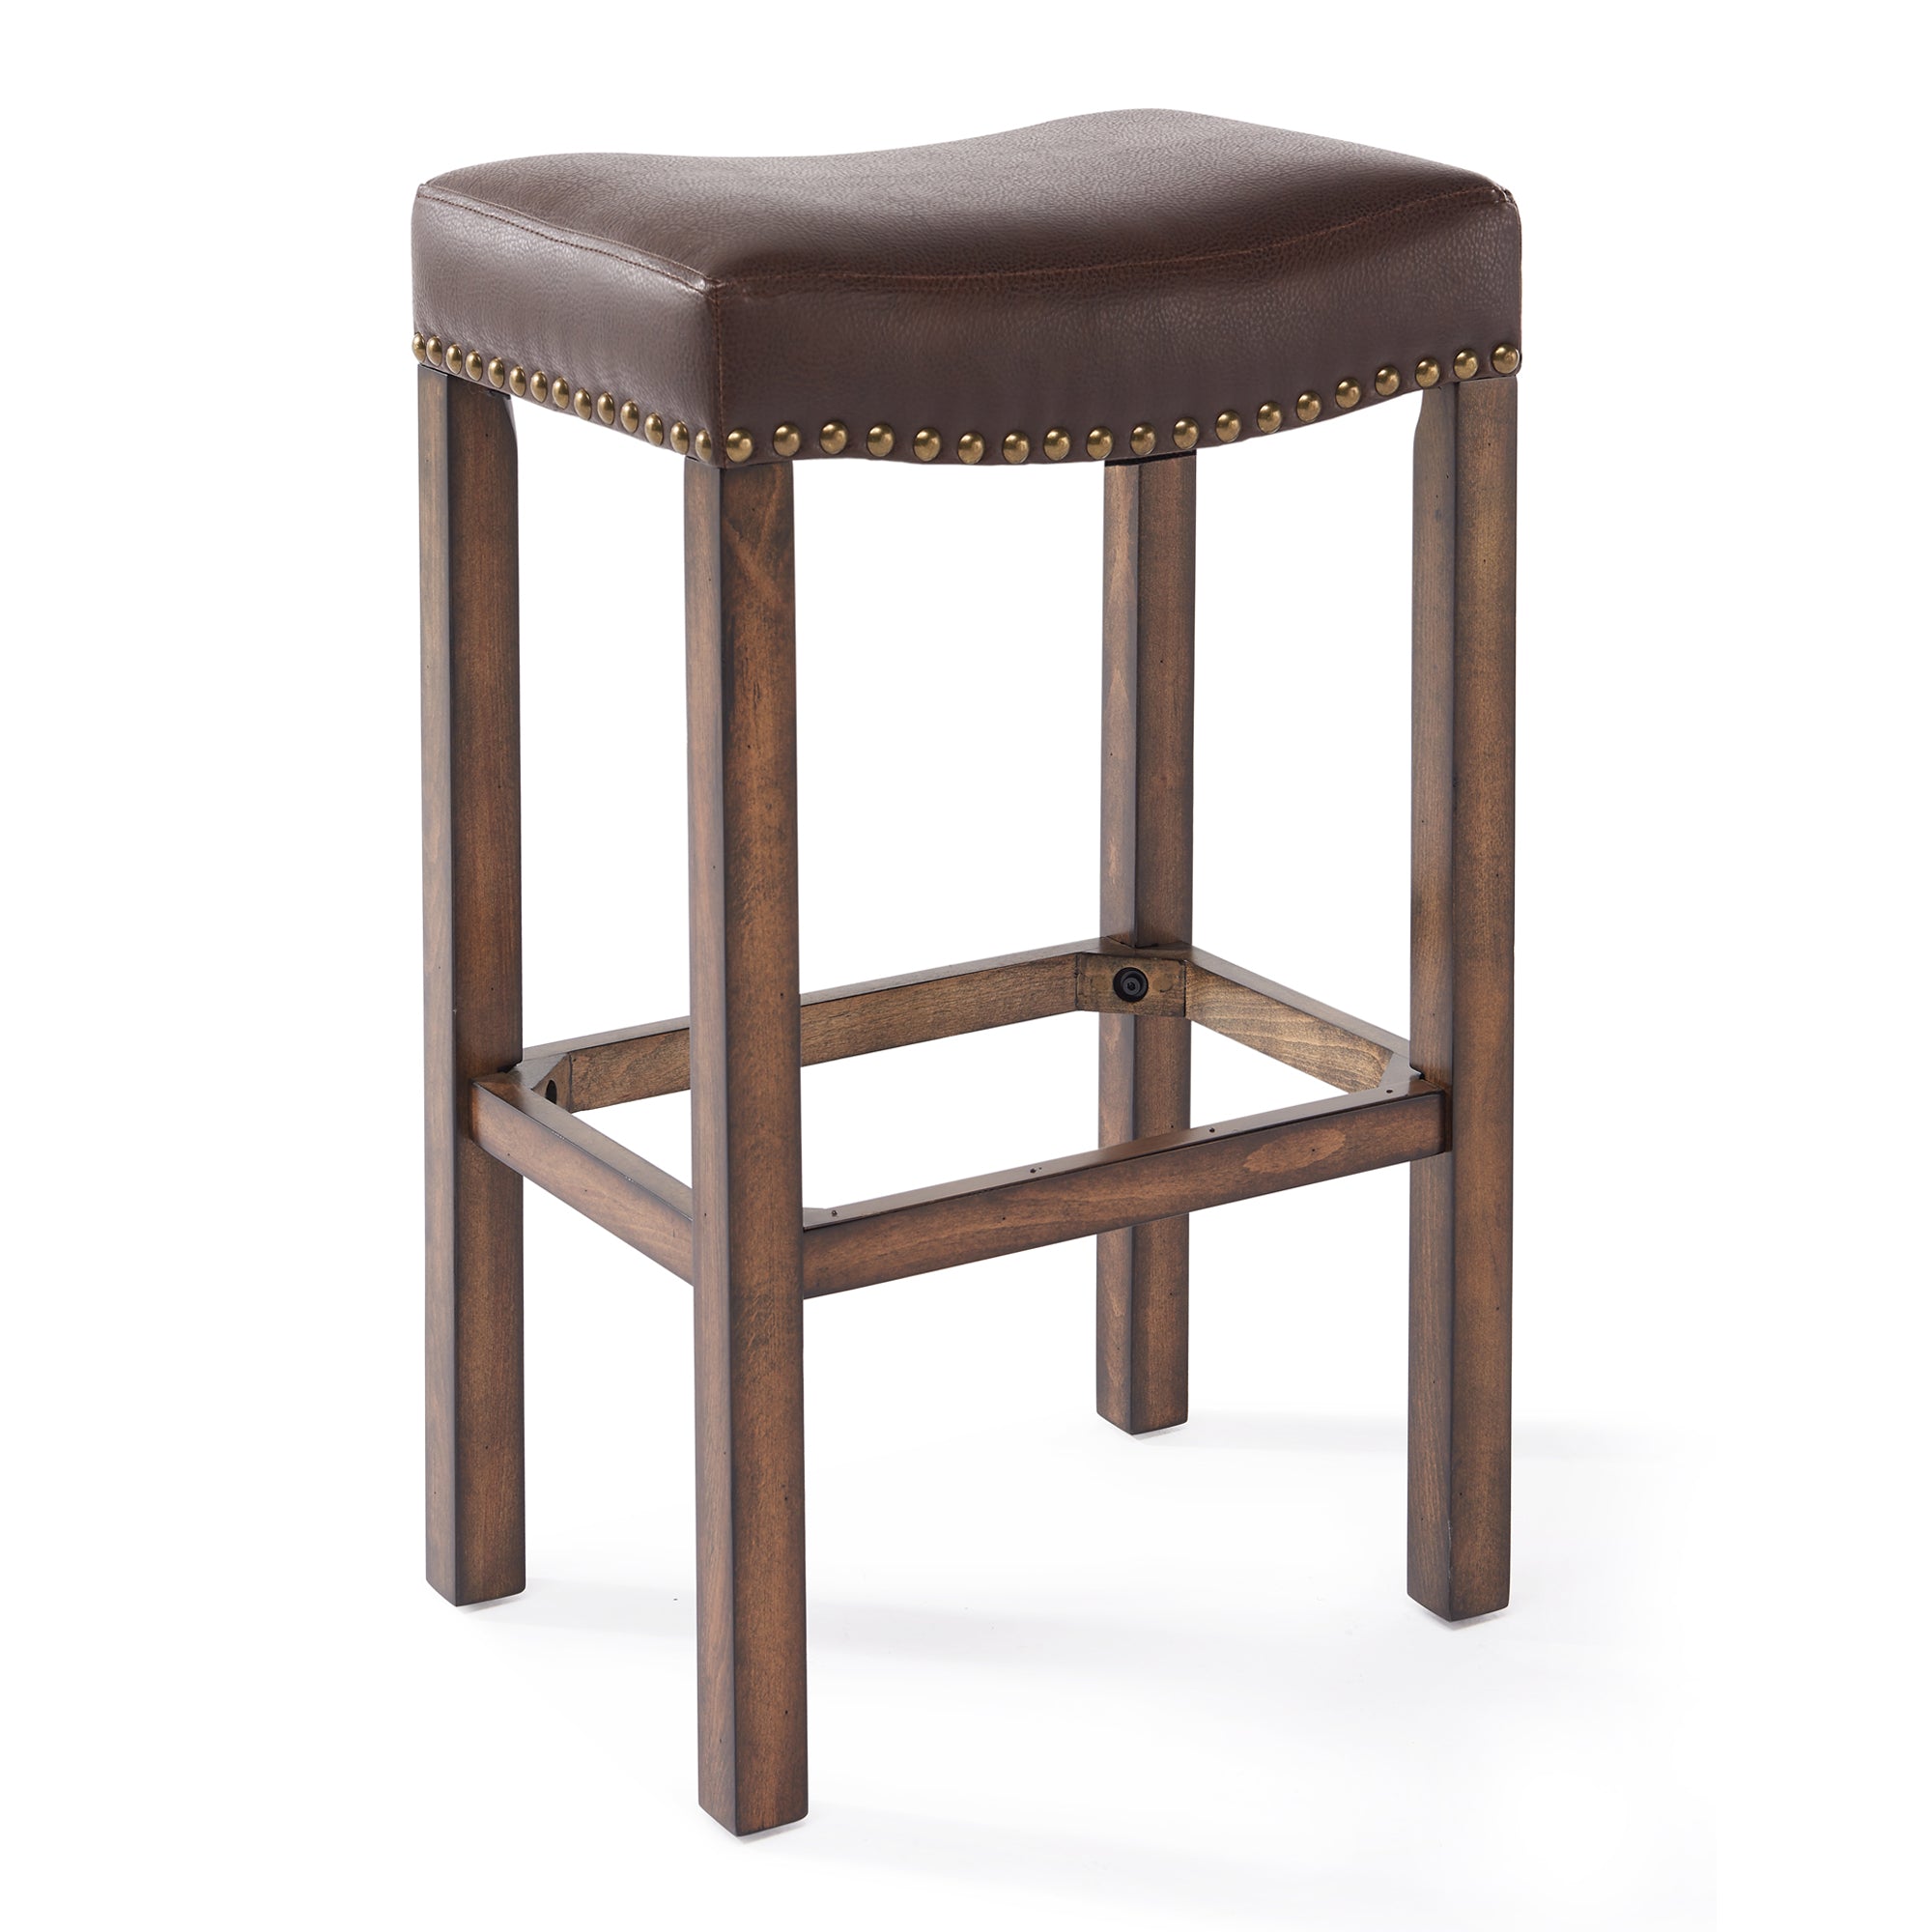 Armen Living Lcmbs013baka26 Tudor 26" Counter Height Wood Backless Barstool In Chestnut Finish And Kahlua Faux Leather